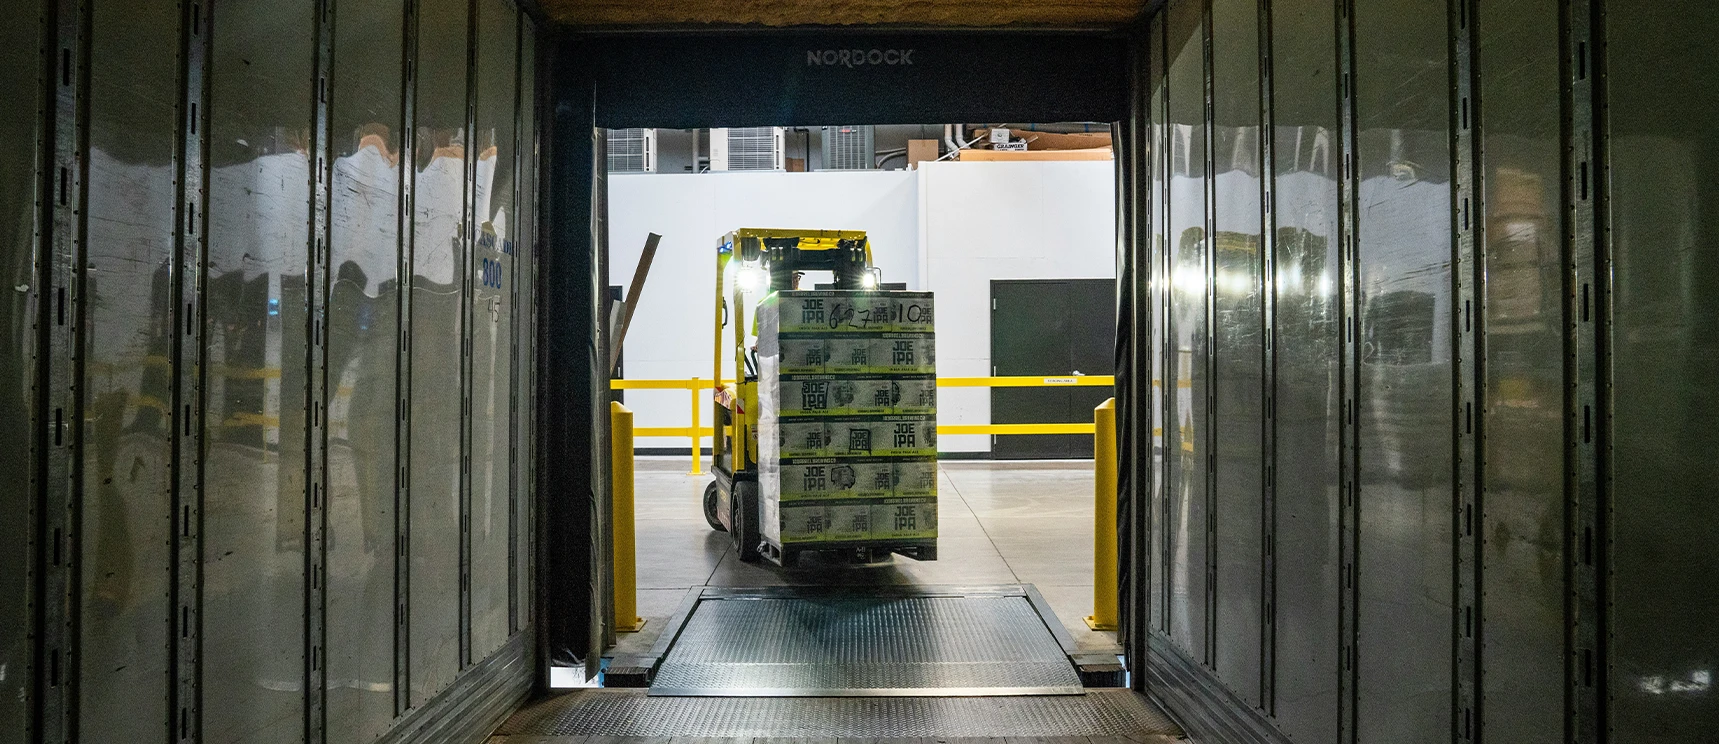 A forklift transporting boxed goods enters a loading dock area in a warehouse.